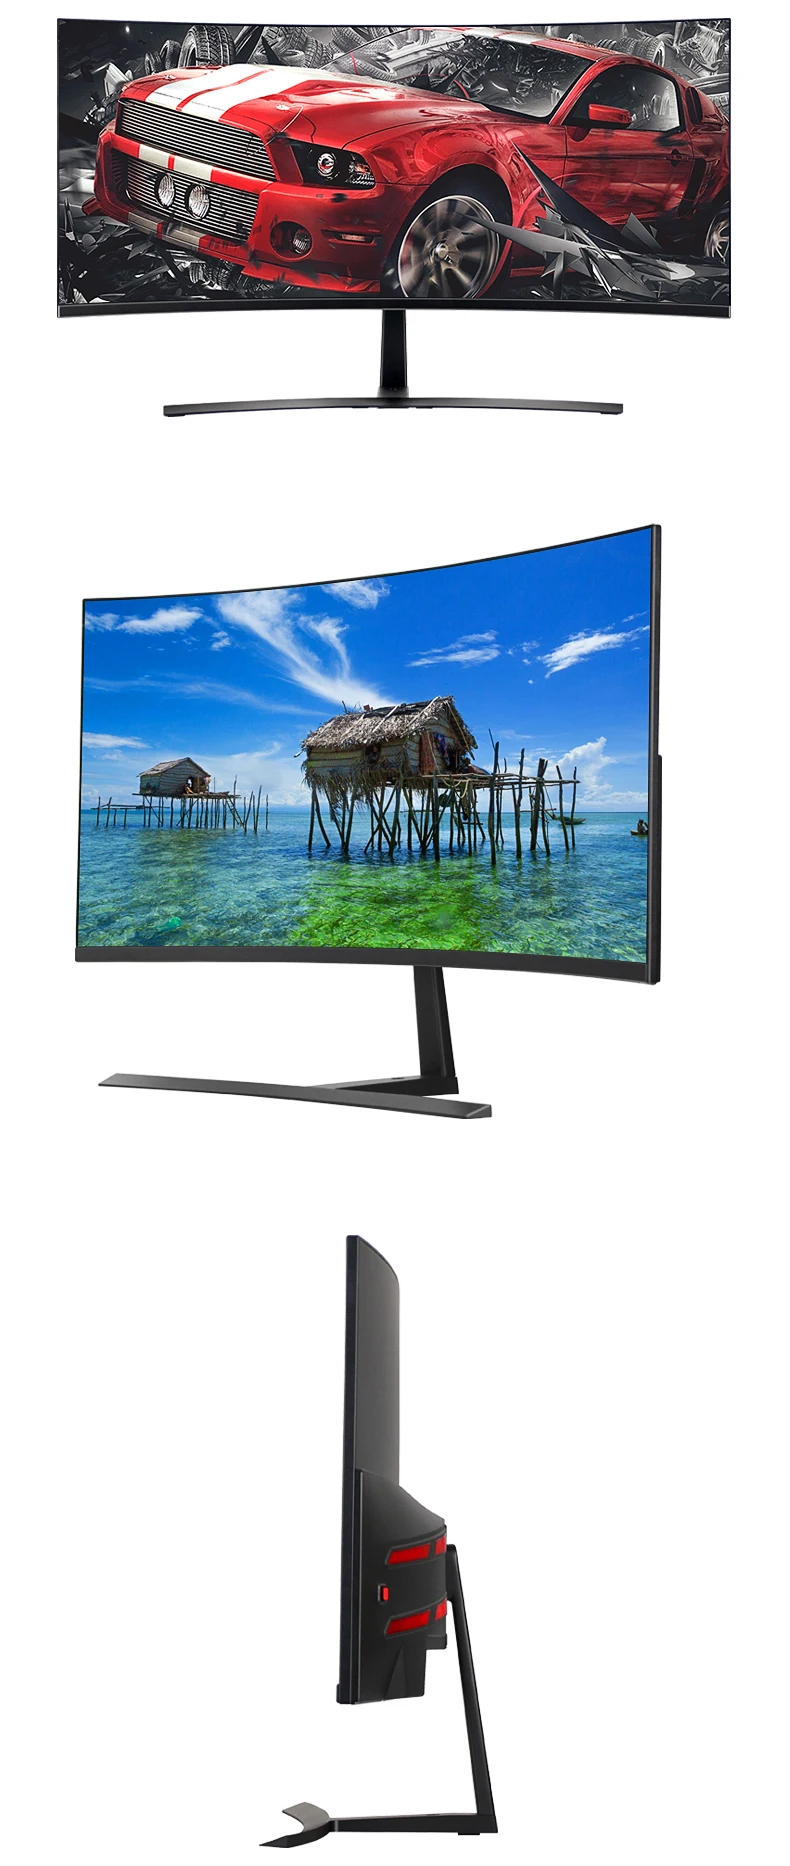 2560 1080 3440 1440 Ultra Wide 21 9 35 Inch Curved Lcd Gaming Monitor View Lcd Monitor Hopestar Or Oem Product Details From Shenzhen Hopestar Sci Tech Co Ltd On Alibaba Com